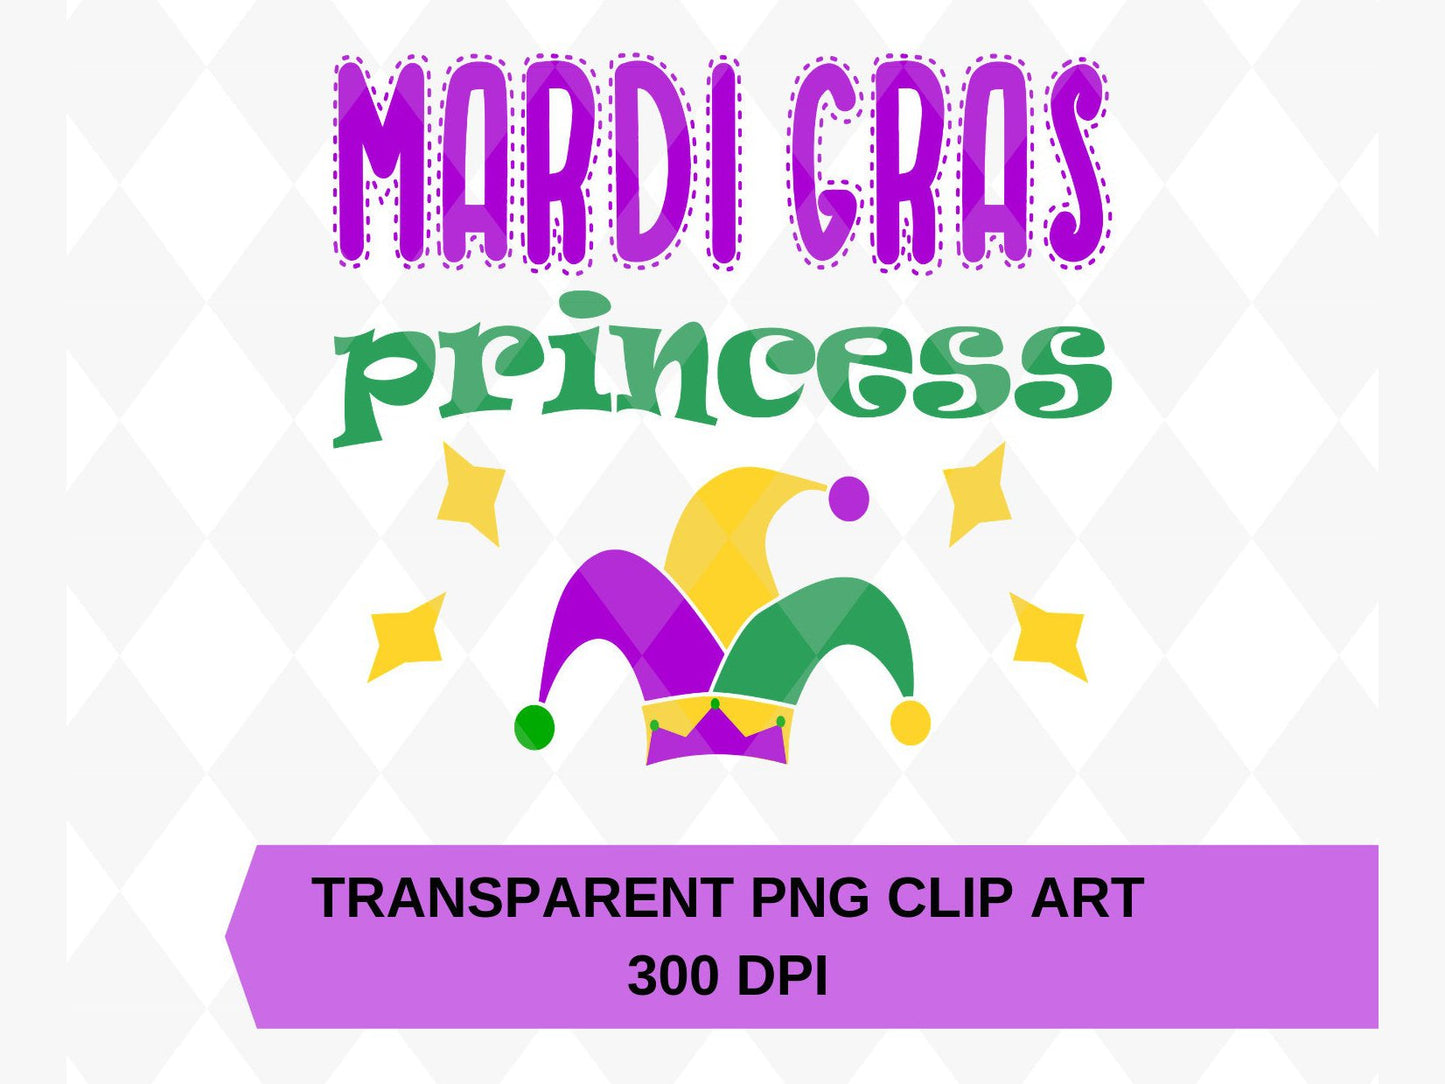 Cute Mardi Gras Princess Mardi Gras Clip Art PNG INSTANT DOWNLOAD - Make your own shirts, mugs, gifts and more for festivals and parties!